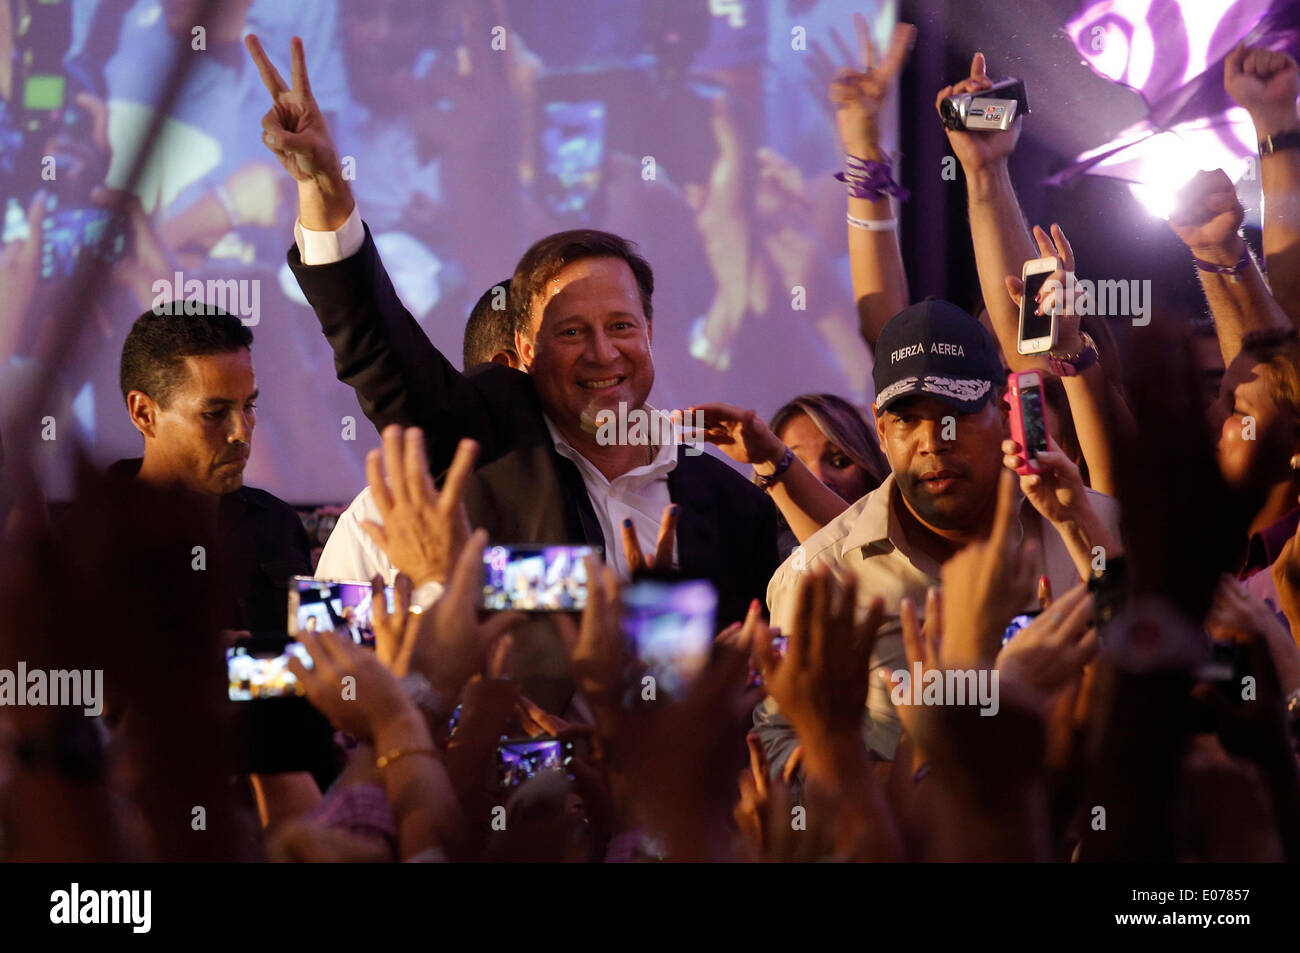 Panama City, Panama. 4th May, 2014. Presidential candidate Juan Carlos Varela (C) from the Panamenista Party greets his supporters after the preliminary results of the general elections, in Panama City, capital of Panama, on May 4, 2014. President of the Supreme Electoral Court Erasmo Pinilla said on Sunday night that Juan Carlos Varela is the virtual winner of Panama's presidency. © Mauricio Valenzuela/Xinhua/Alamy Live News Stock Photo